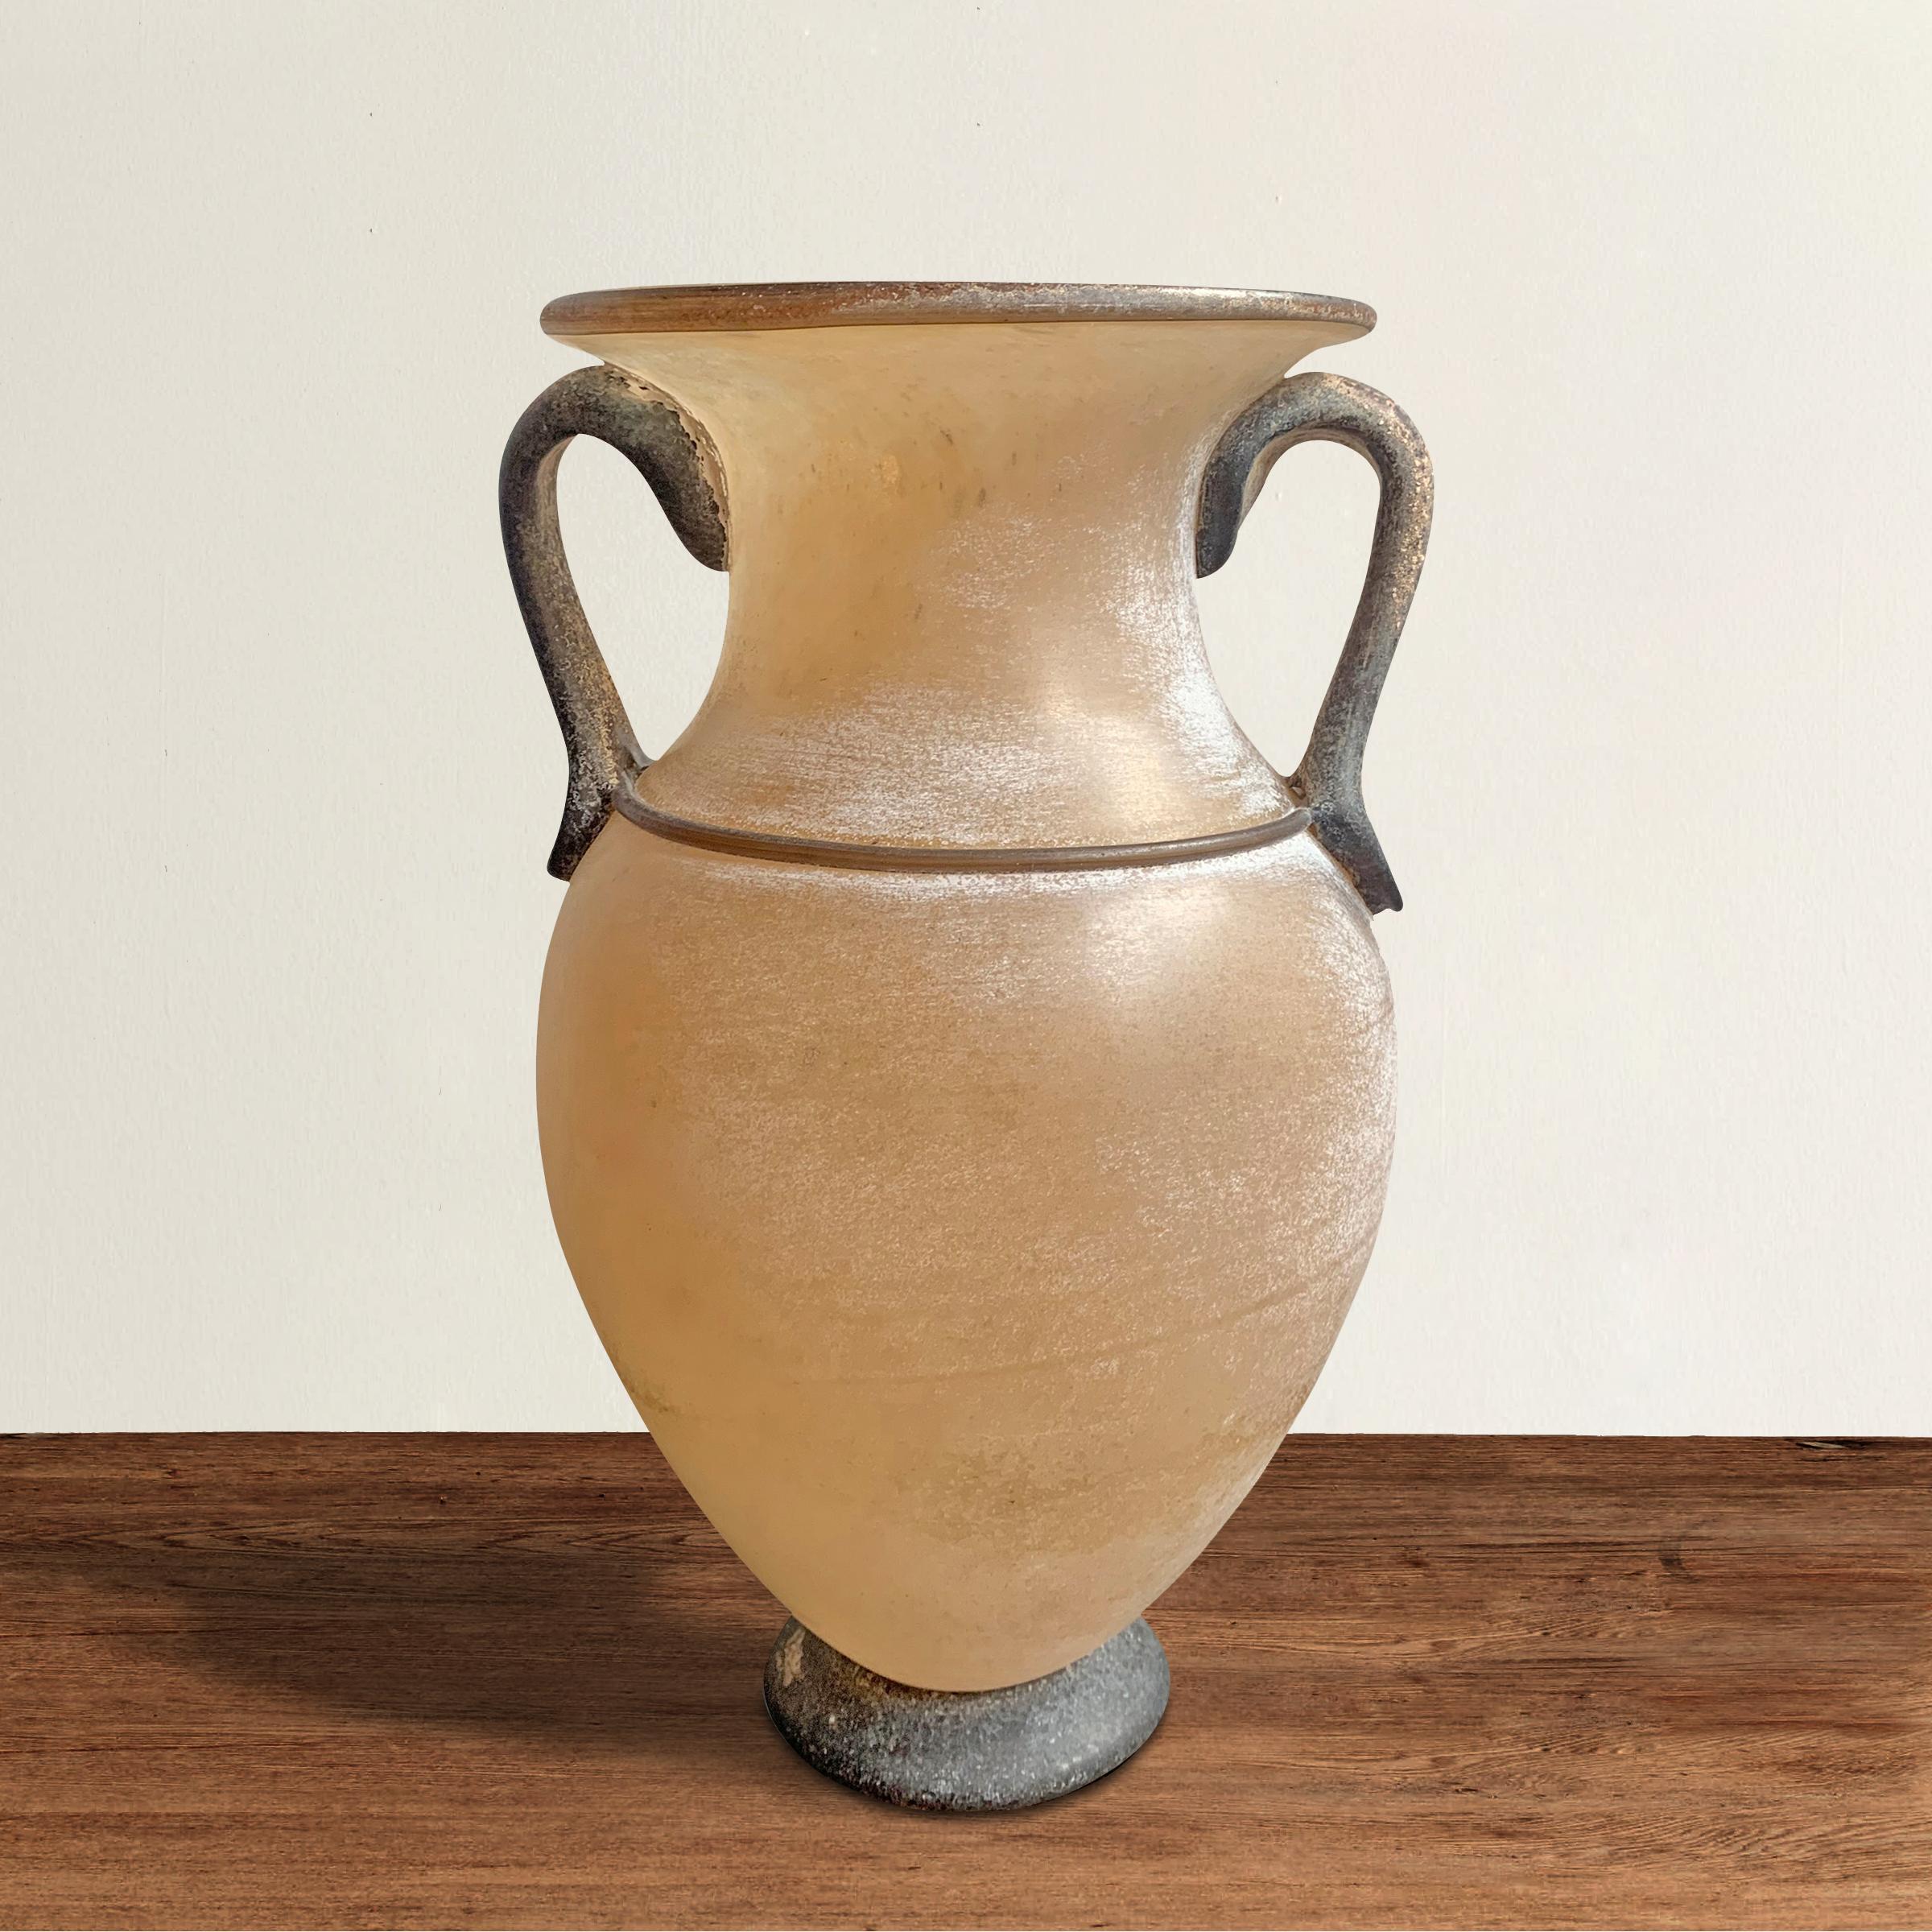 A beautiful mid-20th century Italian Murano blown scavo glass vase of Classical Greek Amphora form with two gray glass handles applied to an opaque creamy white body resting a gray glass foot. The scavo texture give the appearance of being carved of